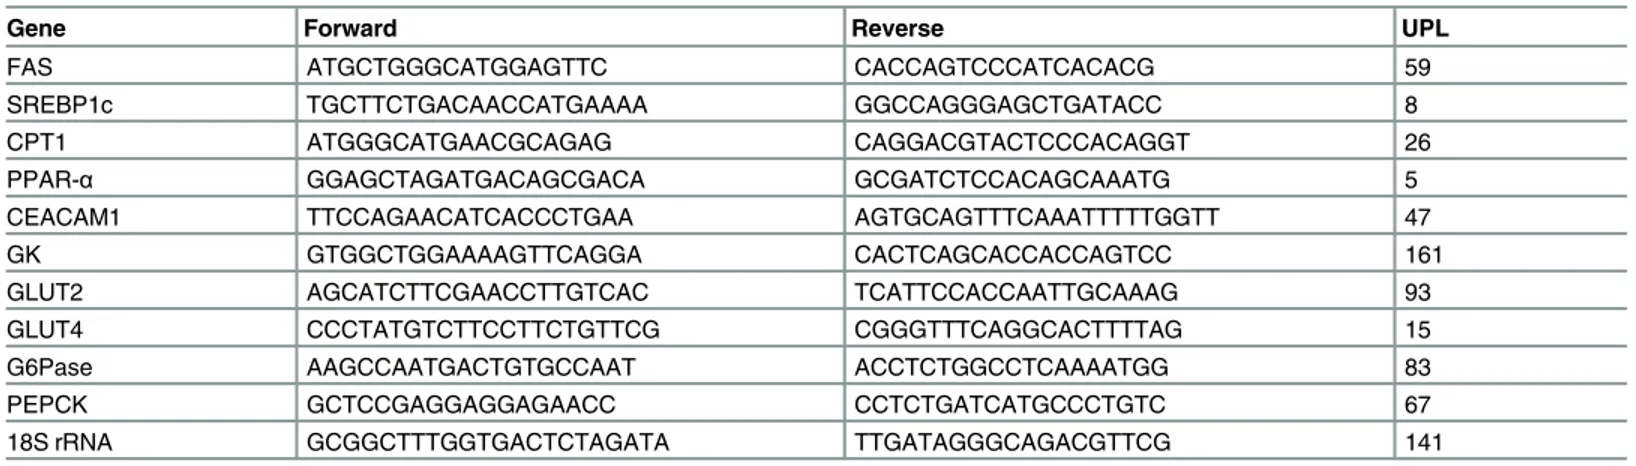 Table 1. Primers and probes used for RT-PCR.